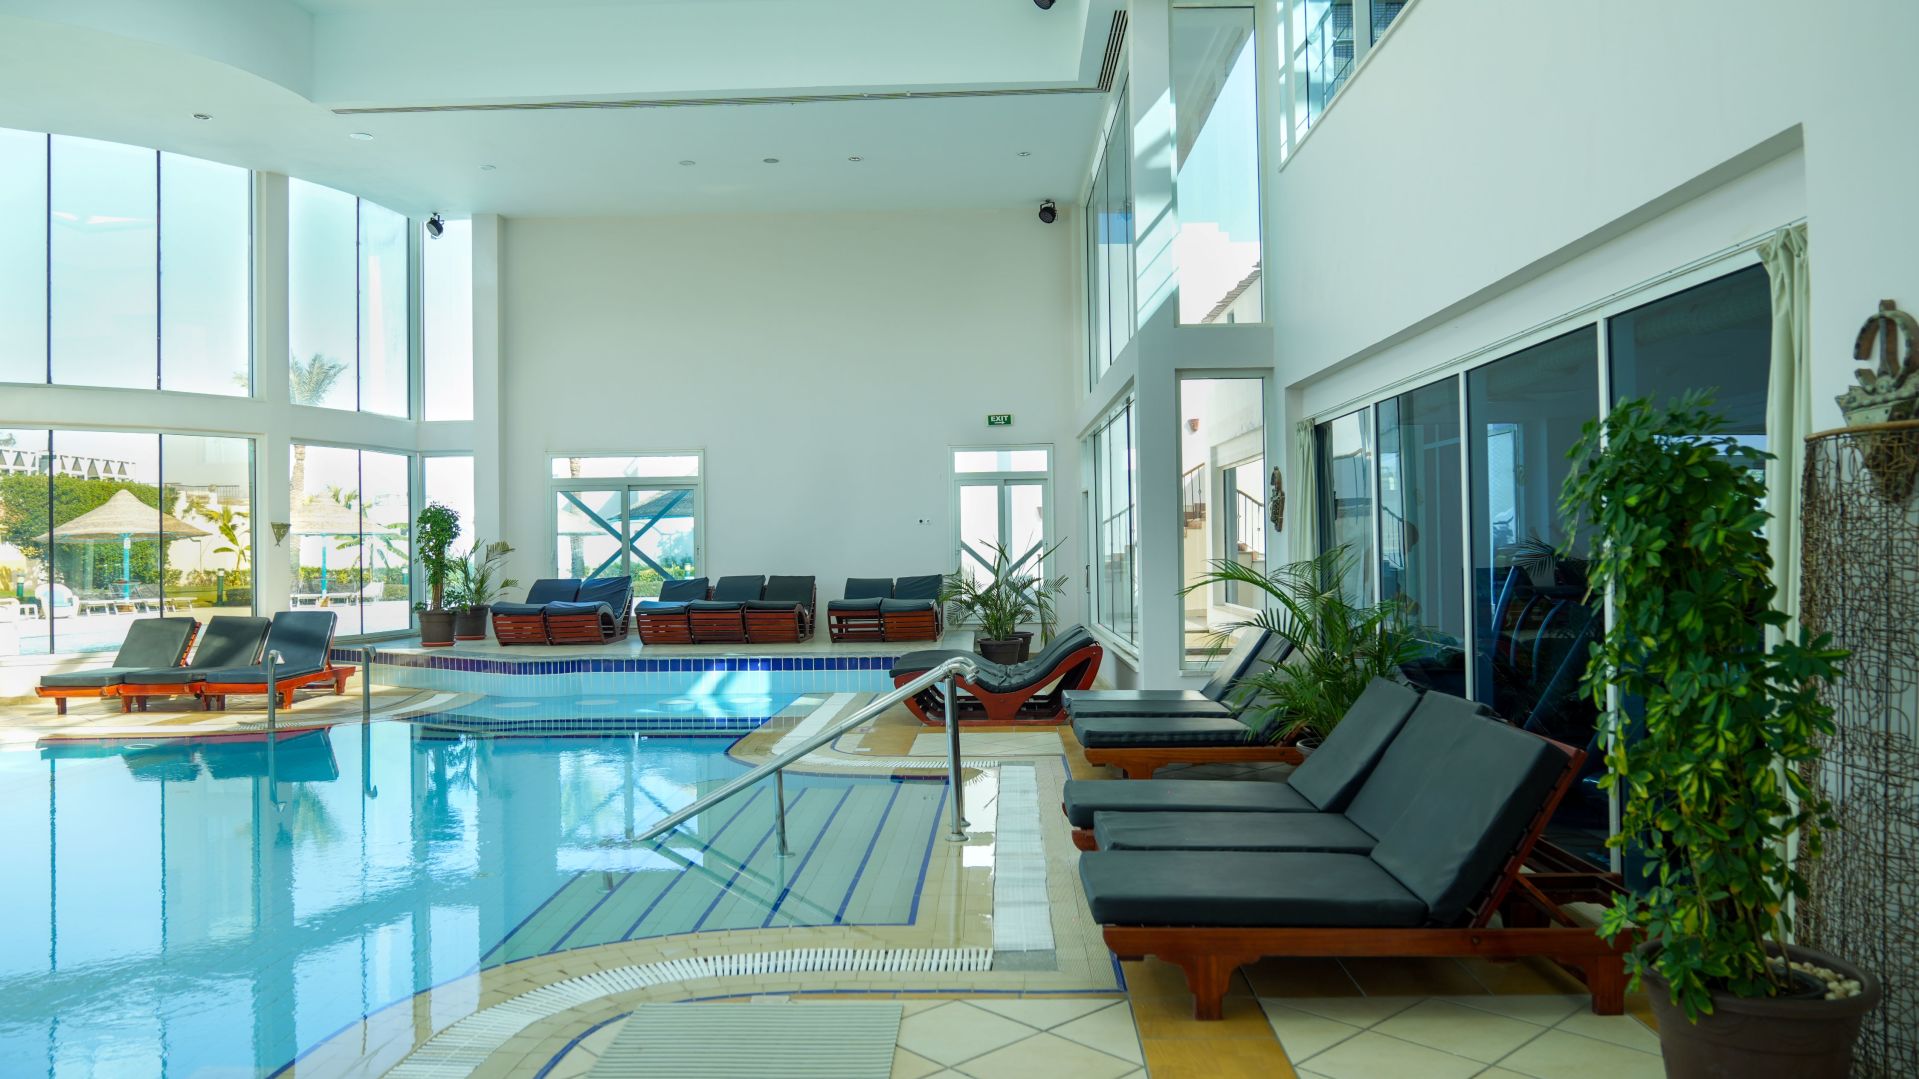 A Swimming Pool In A Large Room